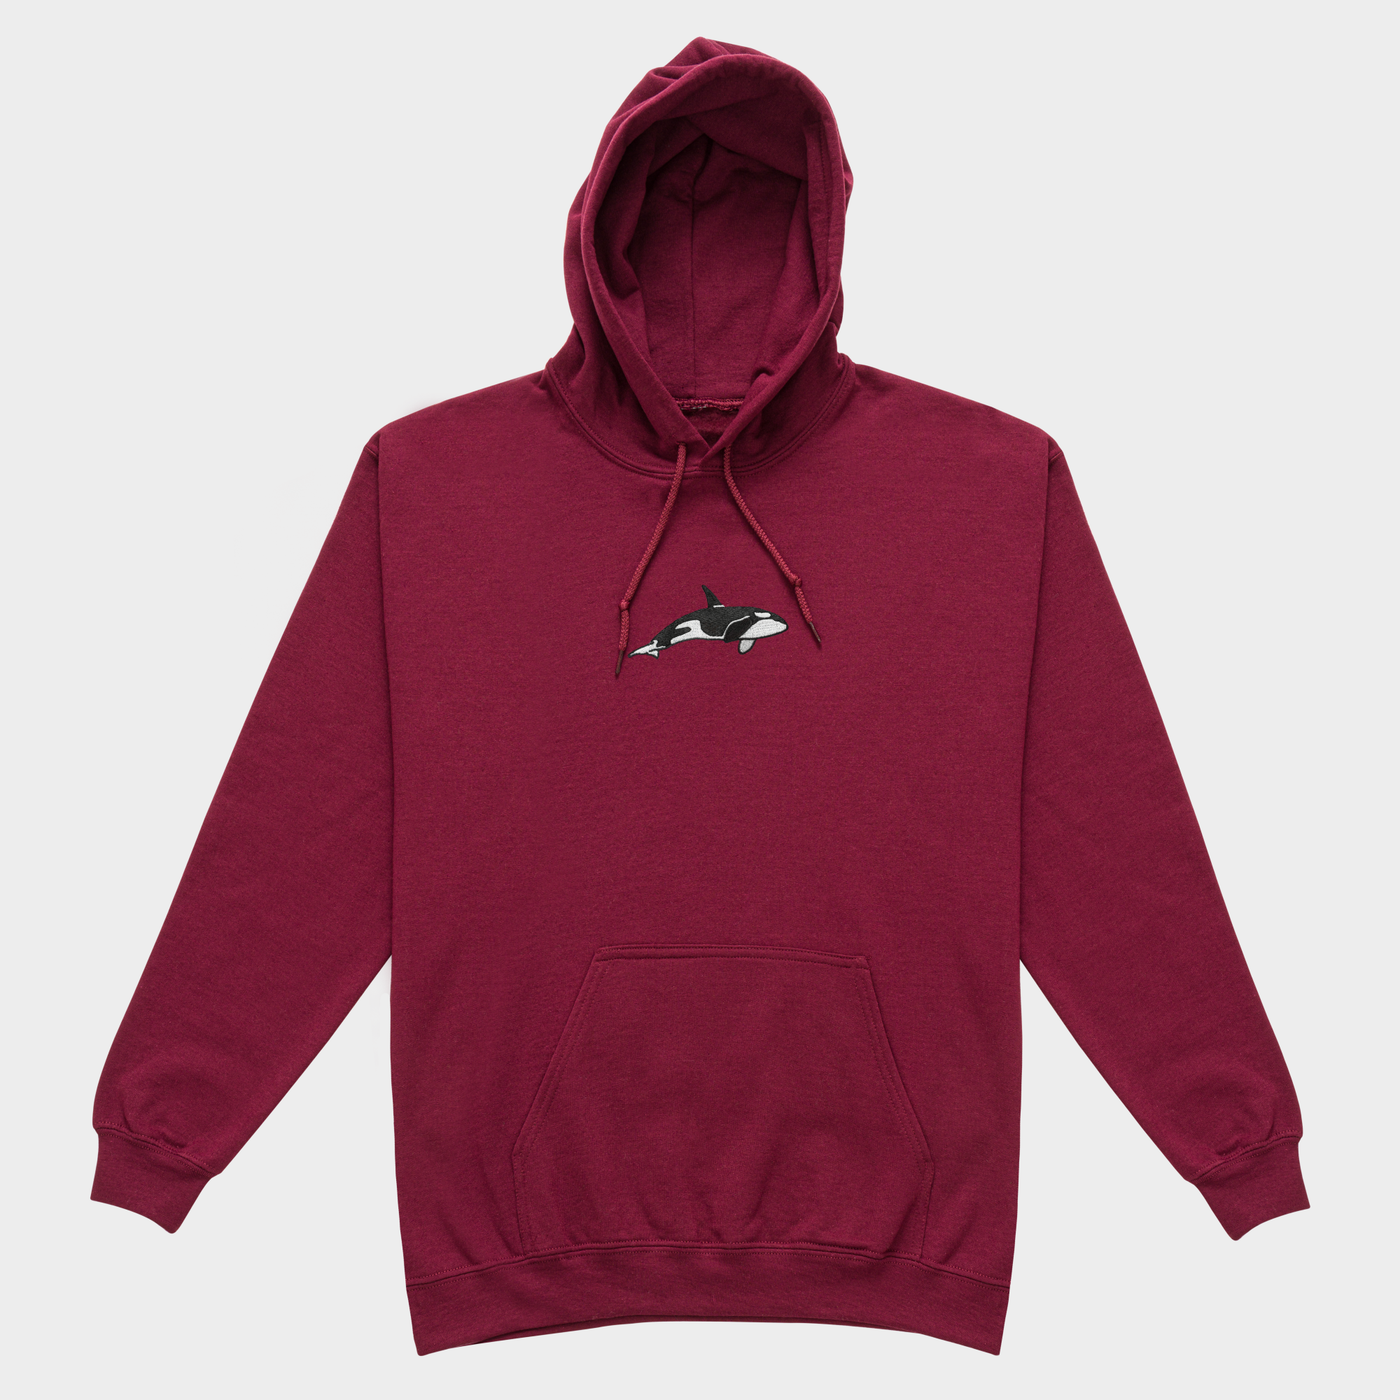 Bobby's Planet Men's Embroidered Orca Hoodie from Seven Seas Fish Animals Collection in Maroon Color#color_maroon